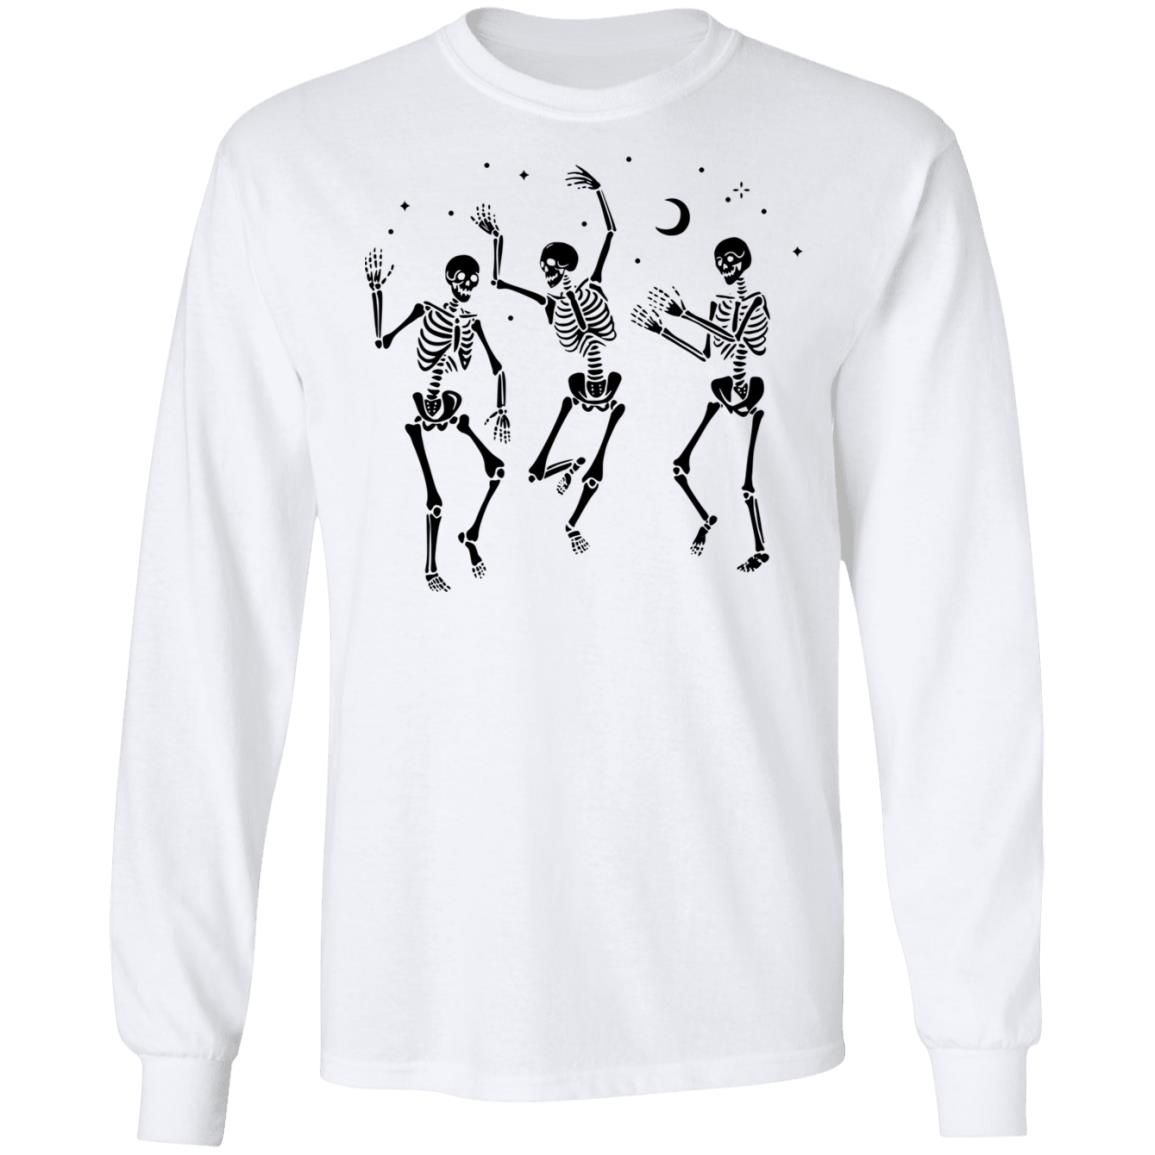 Halloween Party Dancing Skeleton Shirt Style: LS Ultra Cotton T-Shirt, Color: White